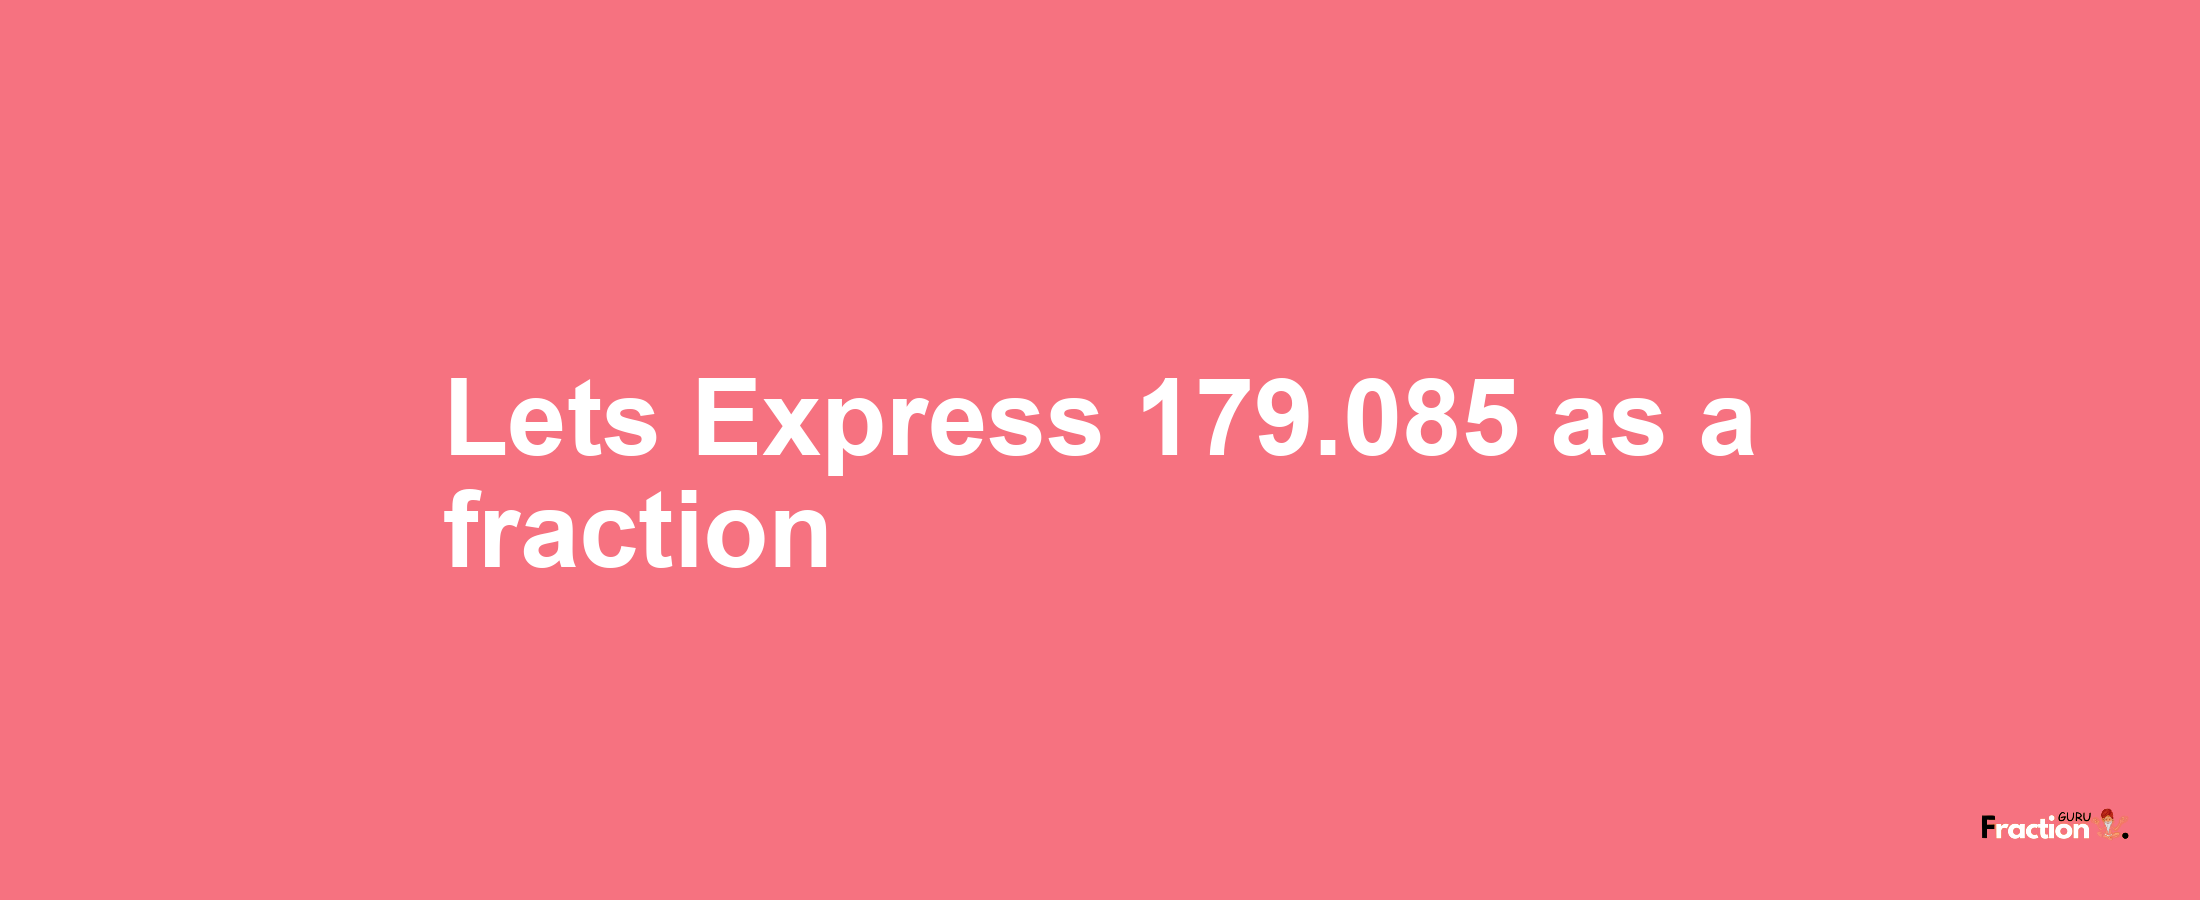 Lets Express 179.085 as afraction